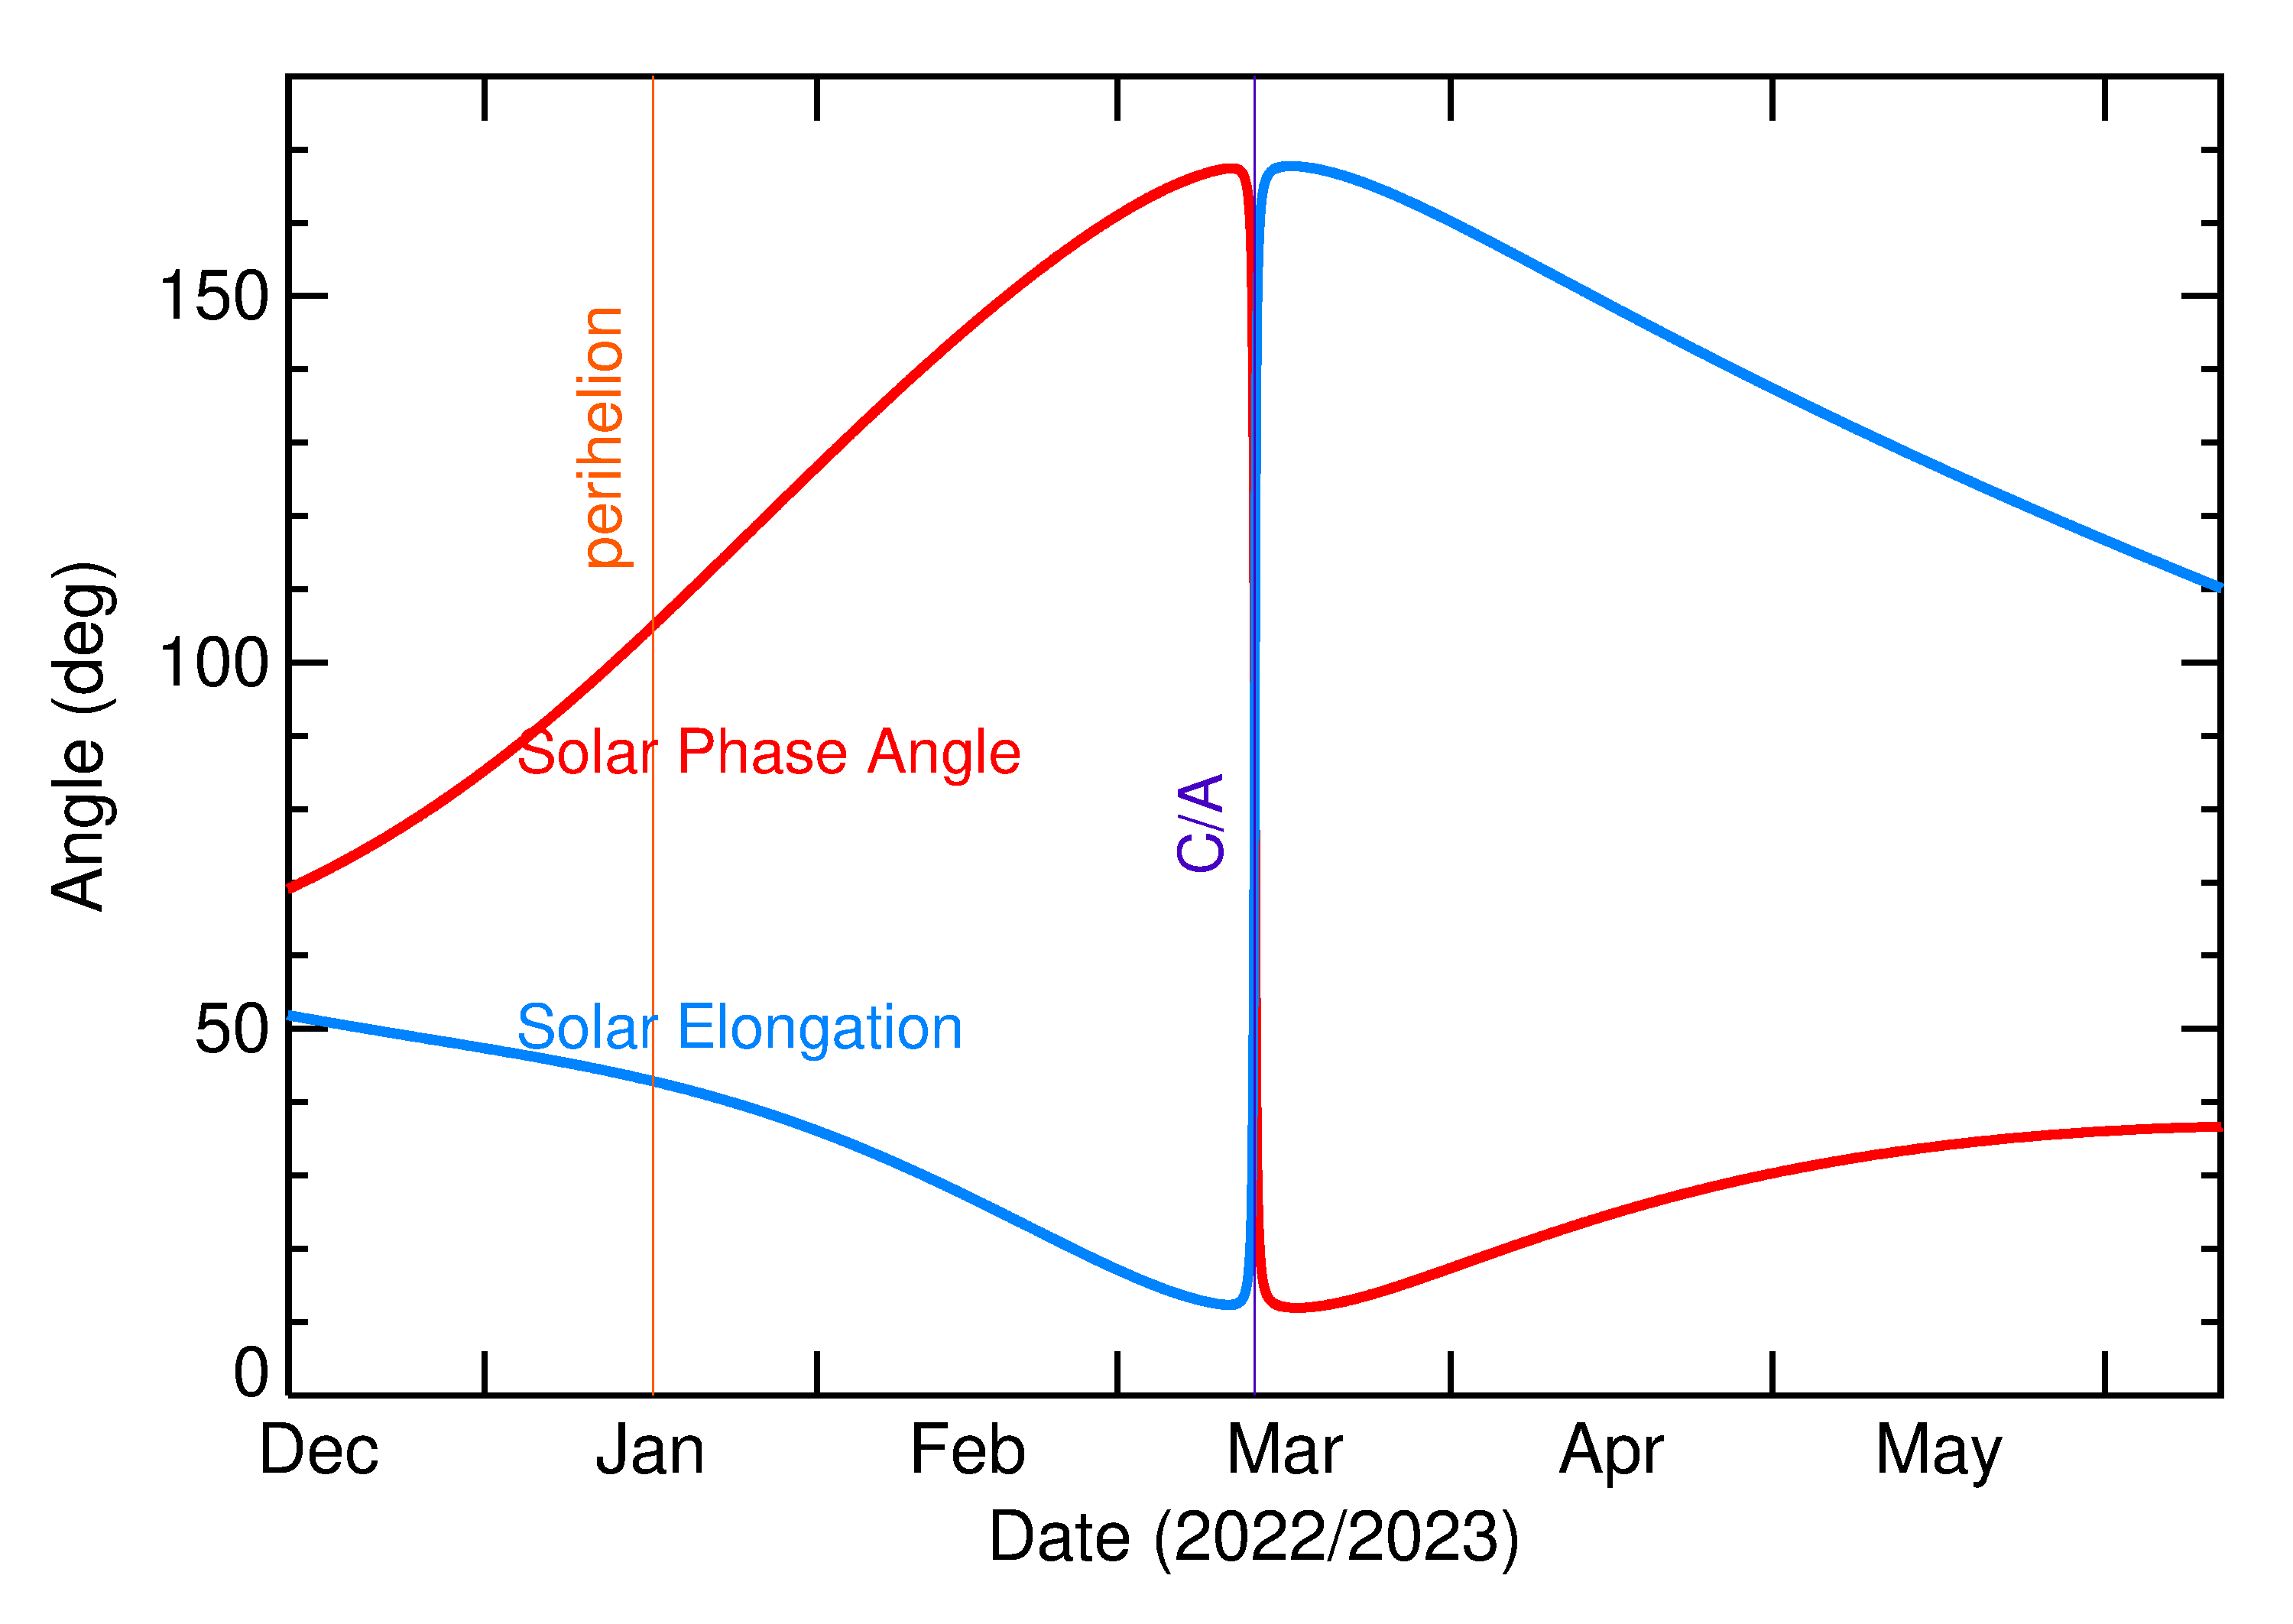 Solar Elongation and Solar Phase Angle of 2023 ET2 in the months around closest approach